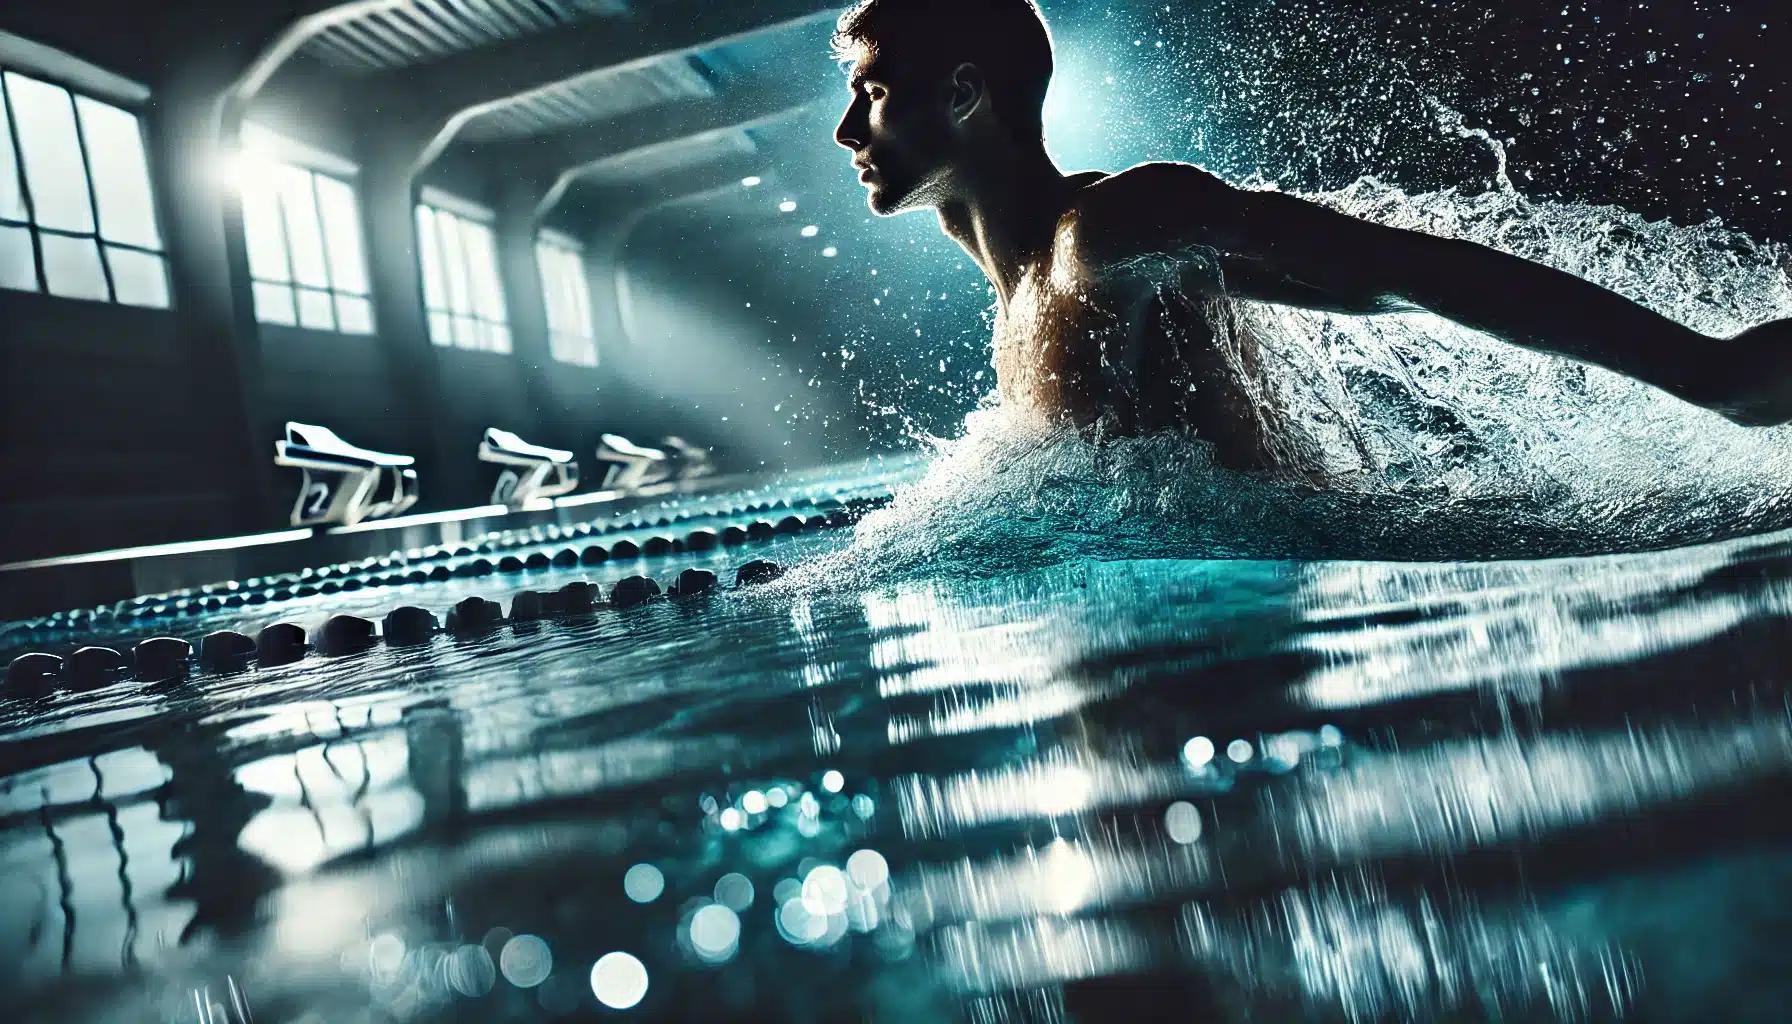 DALL·E 2024 06 19 10.58.37 A professional photograph of a swimmer swimming in a pool. The swimmer is mid stroke with water splashing around. The lighting is dramatic with blue